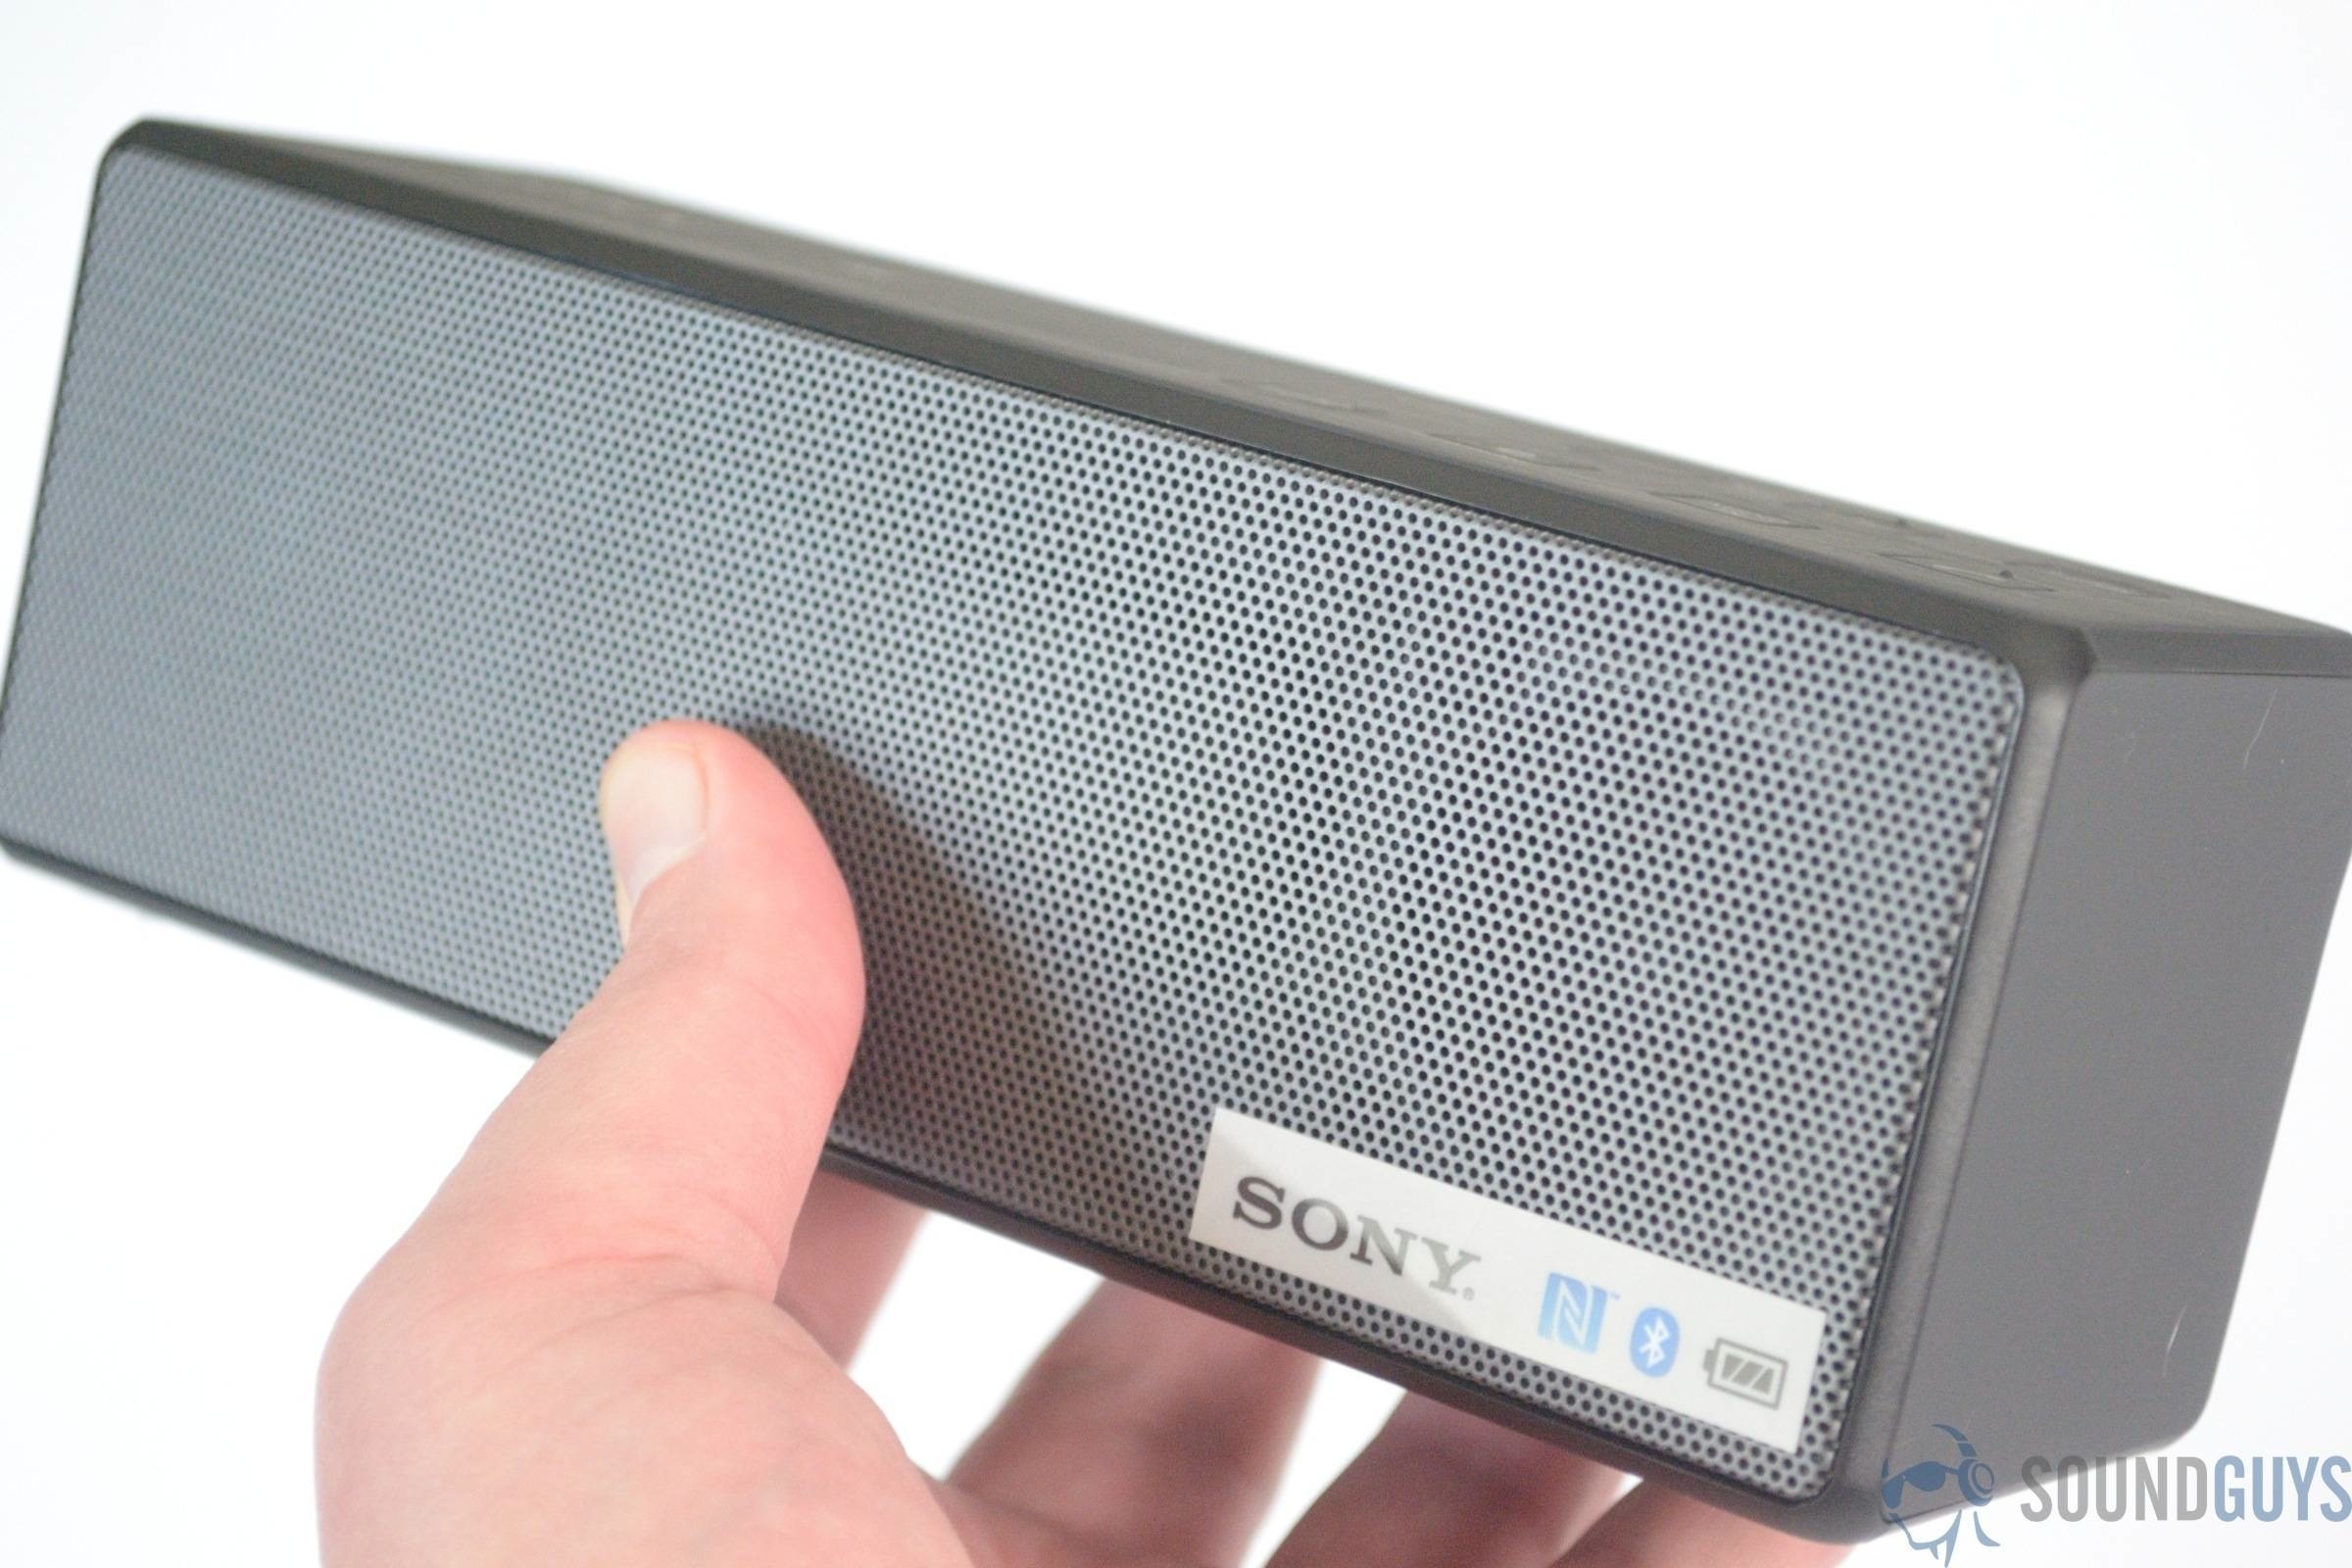 Sony SRS X3 held in hand